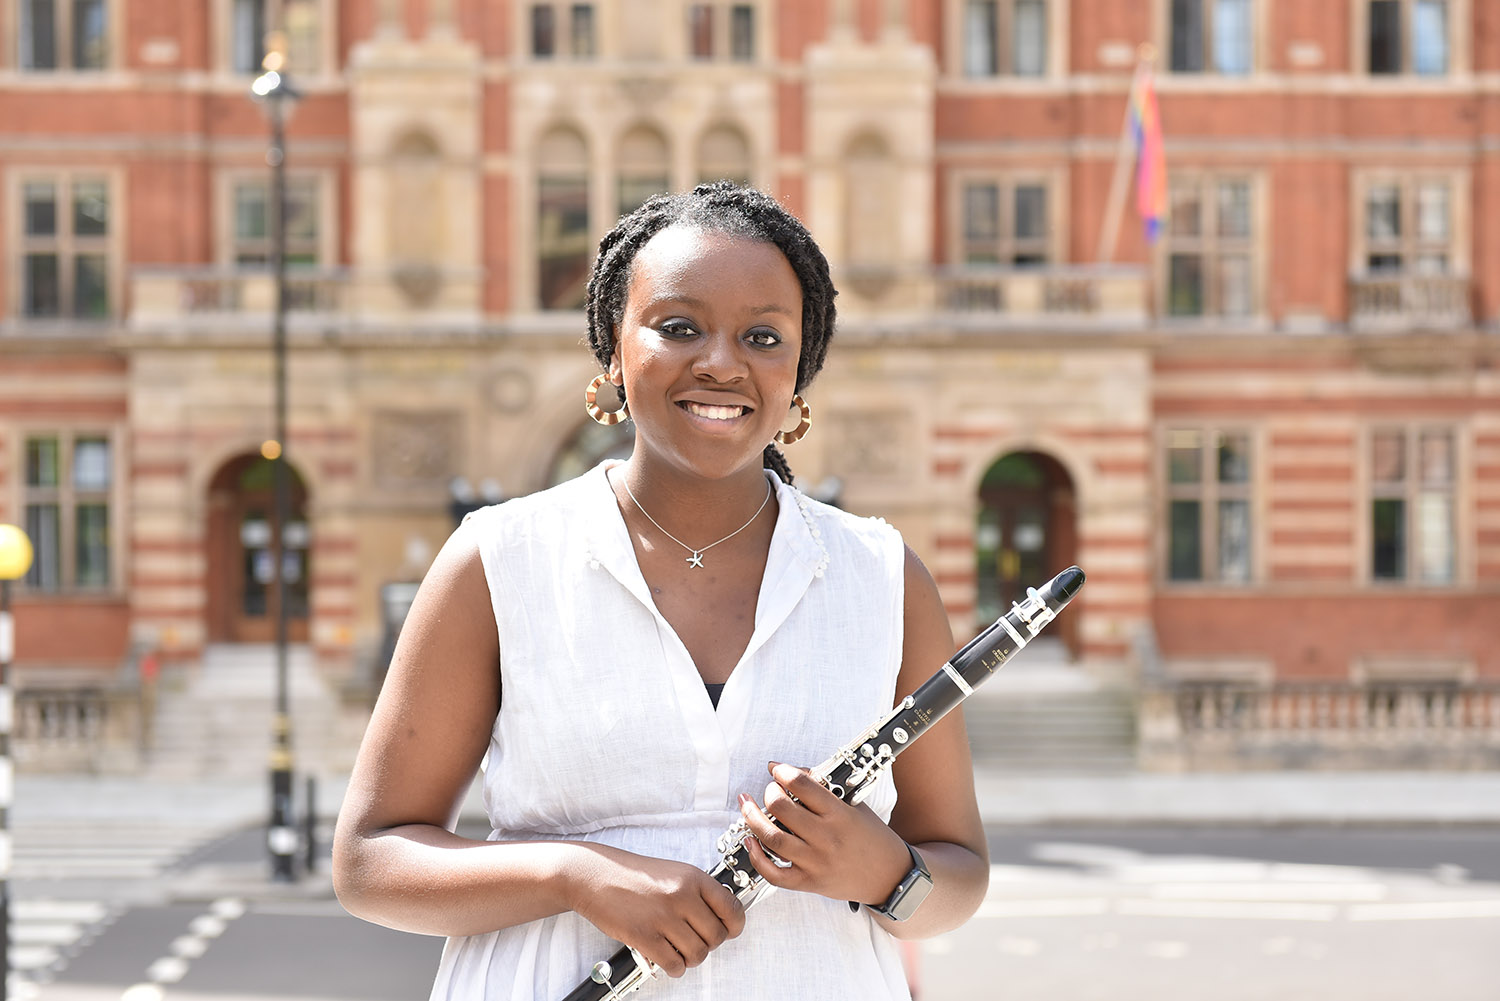 A girl smiling wearing a white dress stands in front of the RCM holding a clarinet